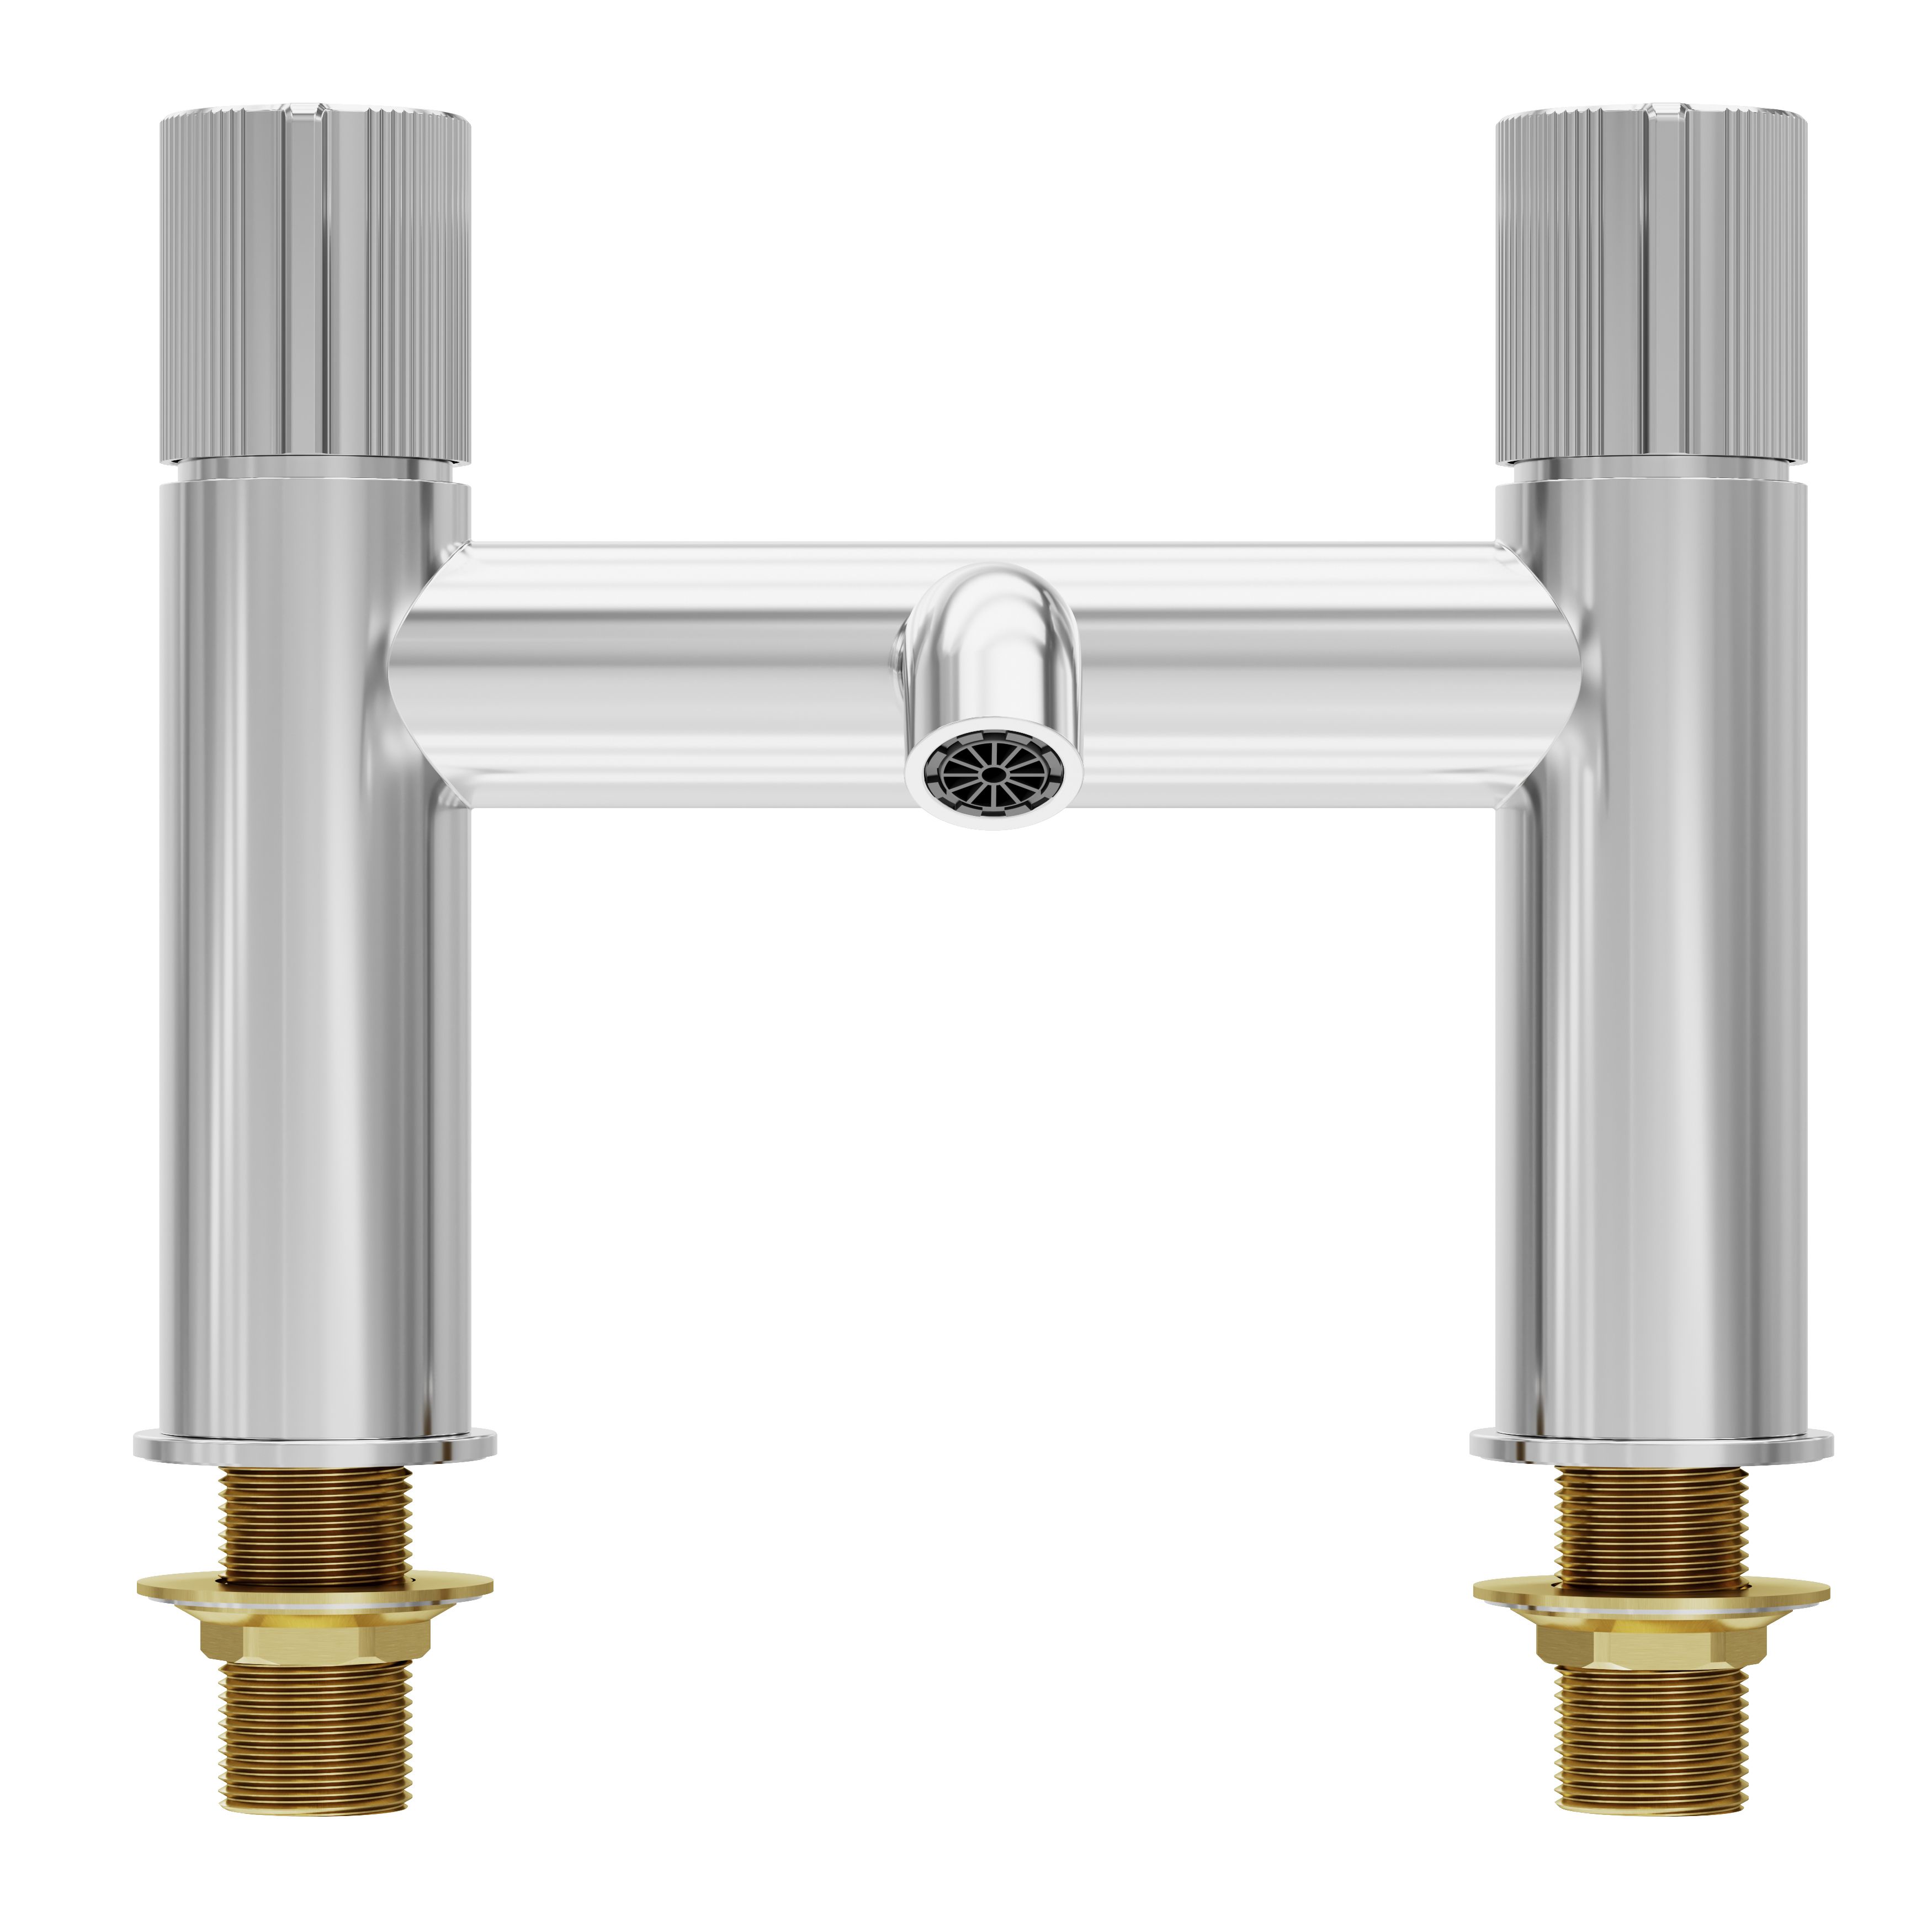 GoodHome Levanna Gloss Chrome effect Deck-mounted Manual Double Bath Filler Tap